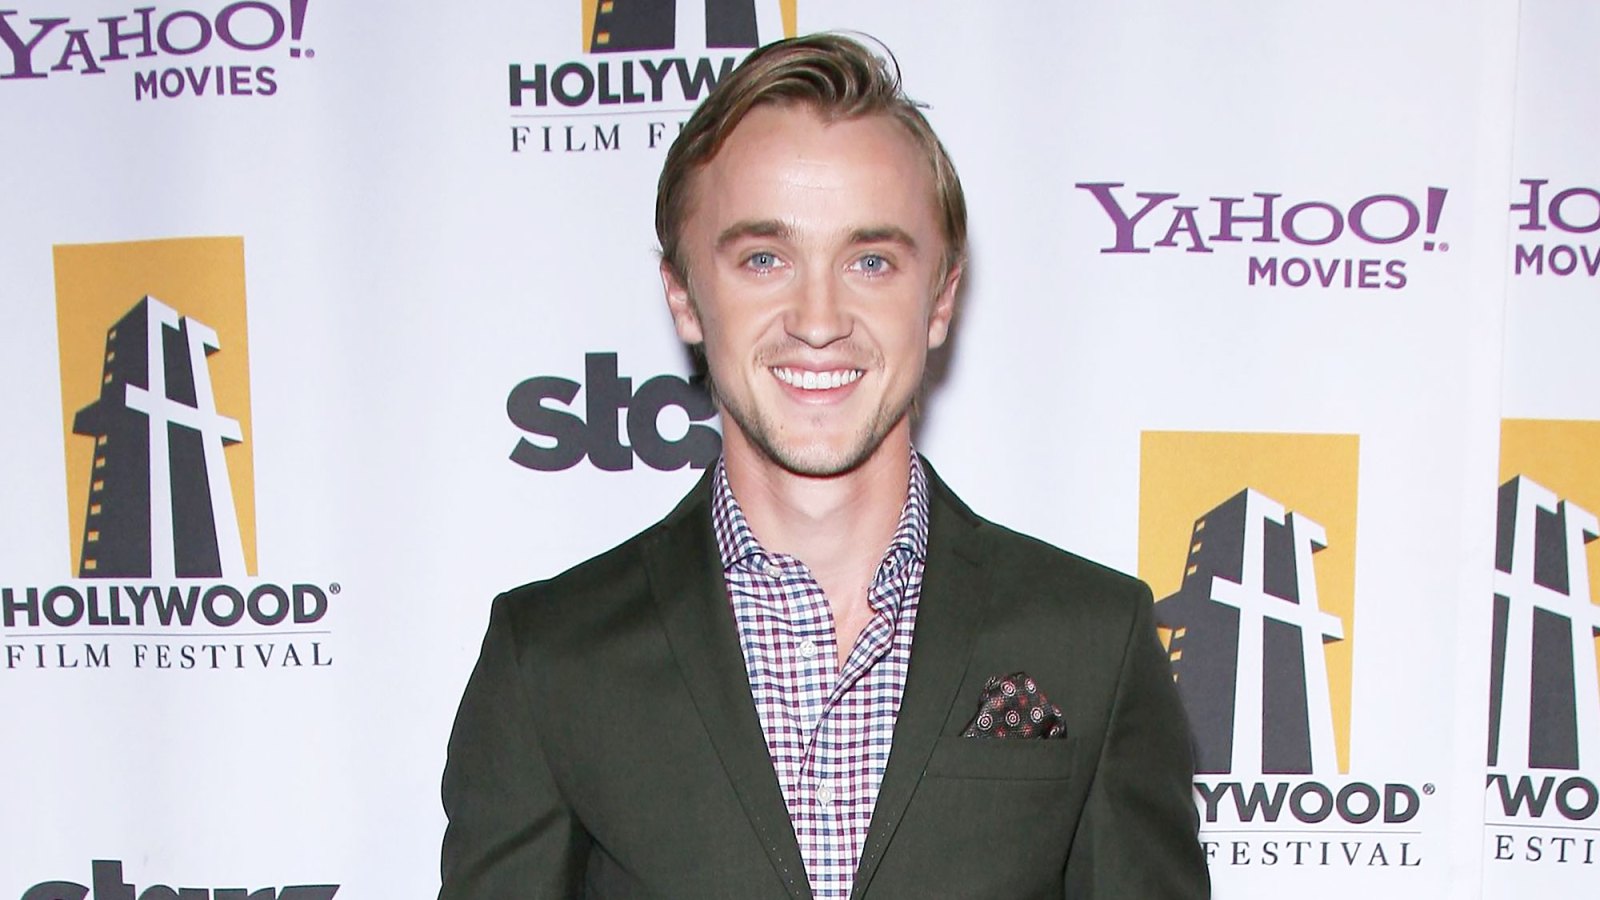 5-Things-You-Don’t-Know-About-Harry-Potter’s-Tom-Felton-Tom-Felton-2011